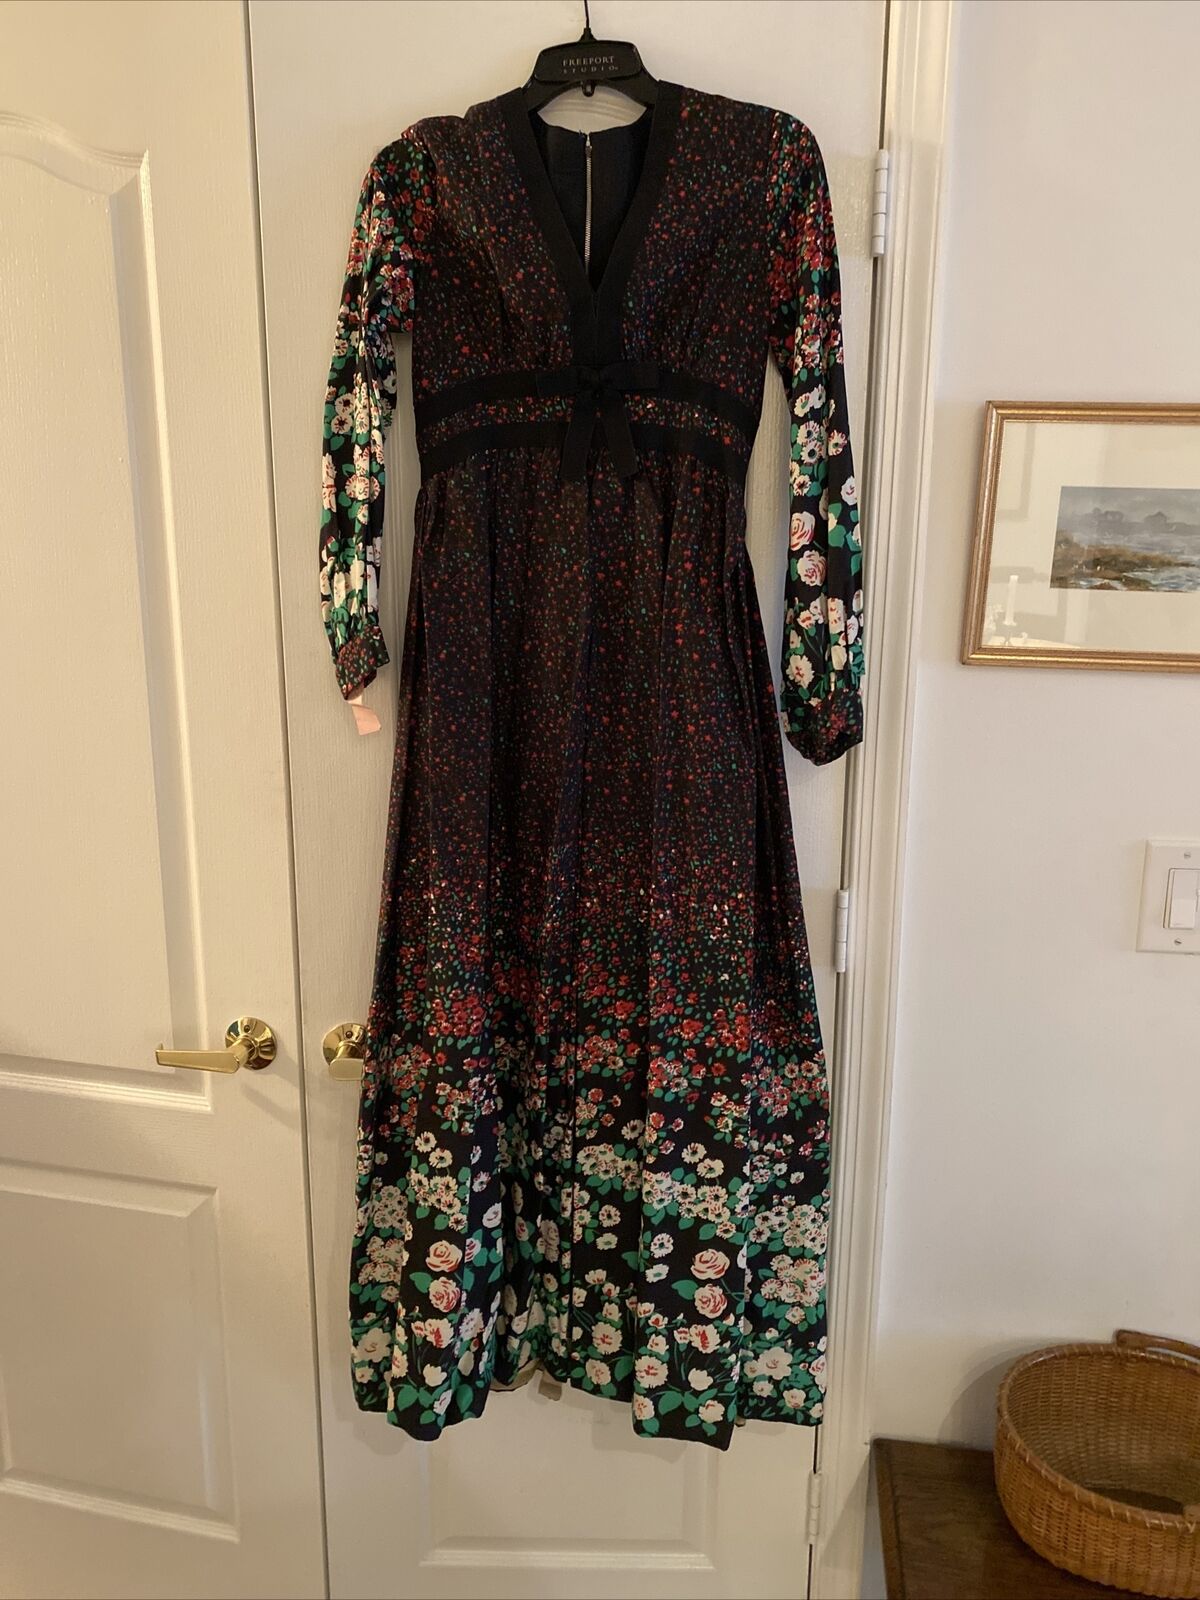 Shannon Rodgers/Jerry Silverman Black Cotton Gown with Green/White Floral Spray